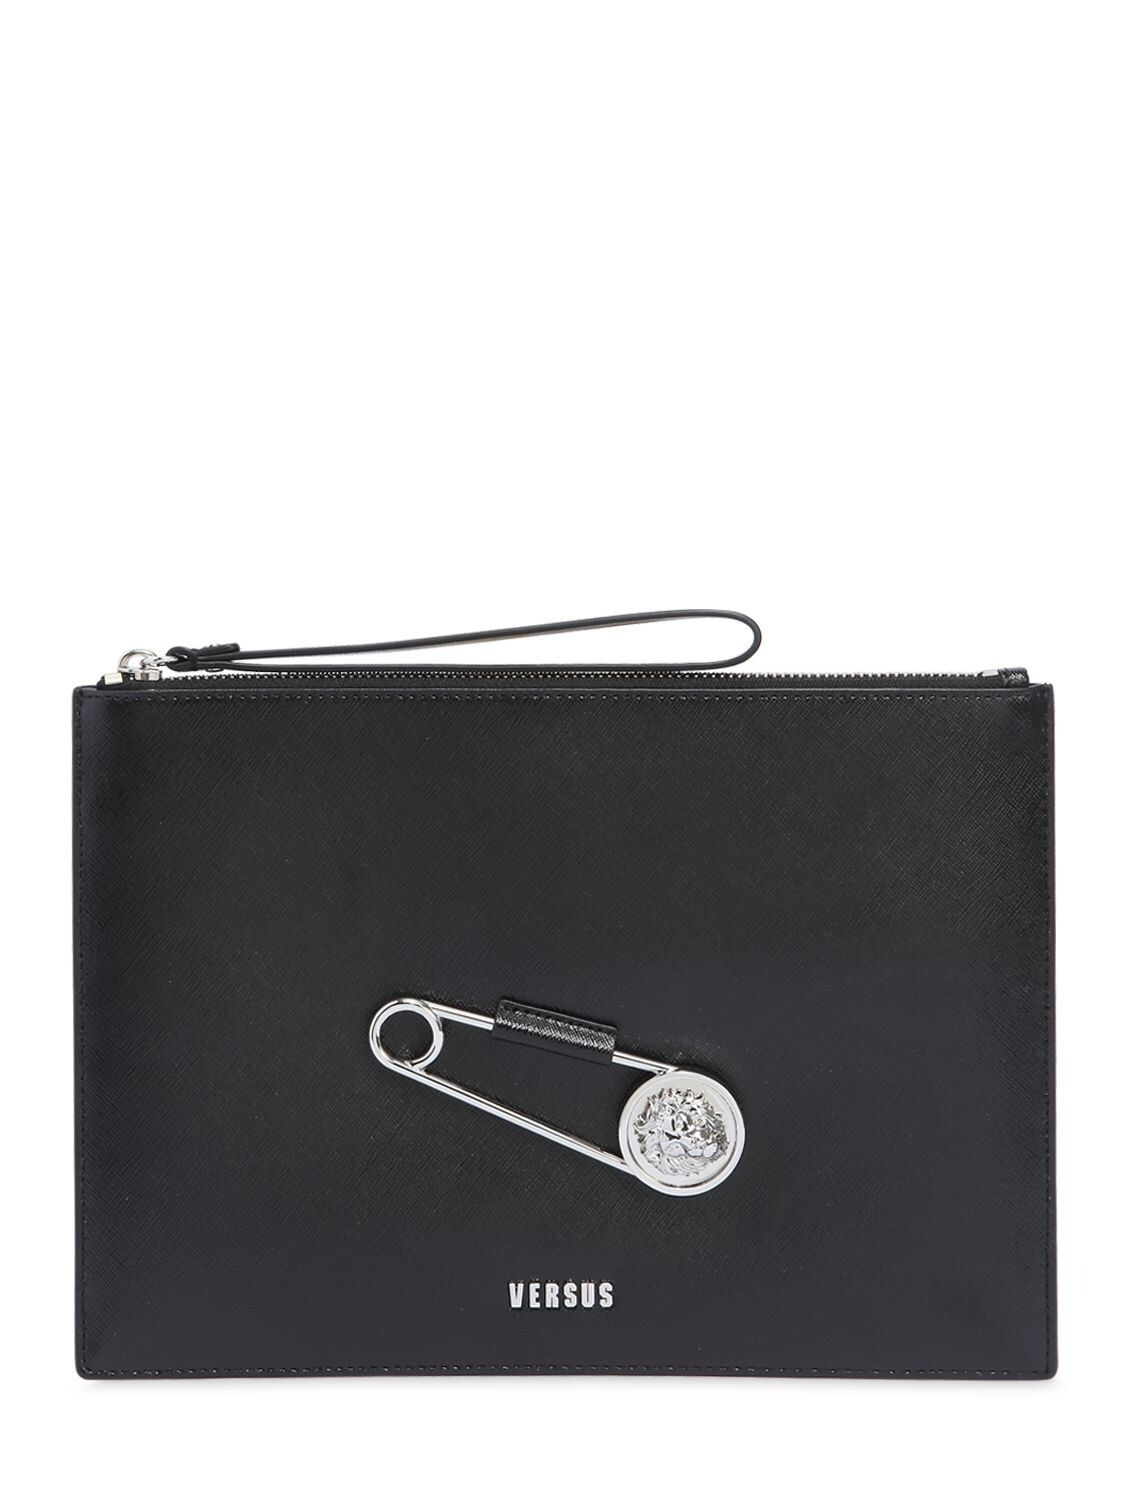 LION SAFETY PIN SAFFIANO LEATHER POUCH | Luisaviaroma